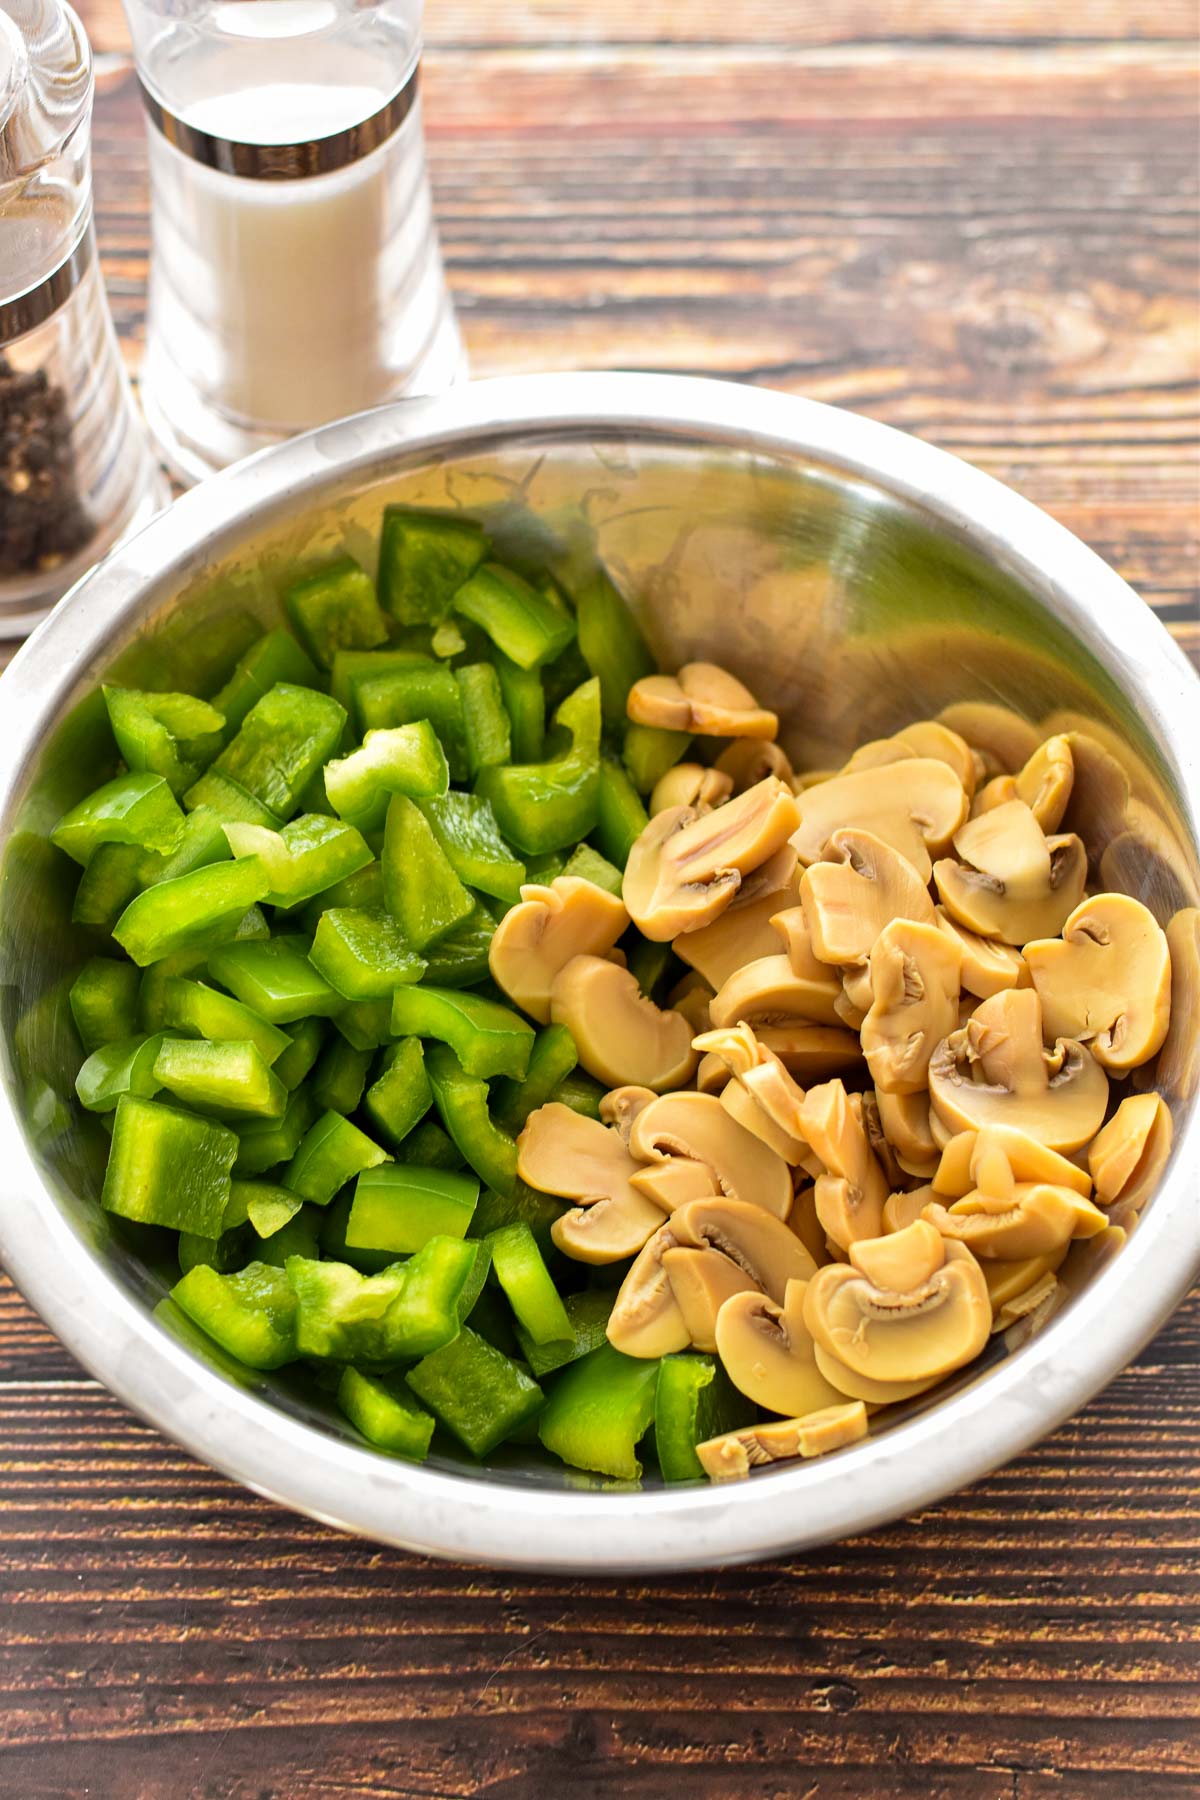 process shot of diced green bell pepper and sliced canned mushrooms in a mixing bowl in front of salt and pepper shakers